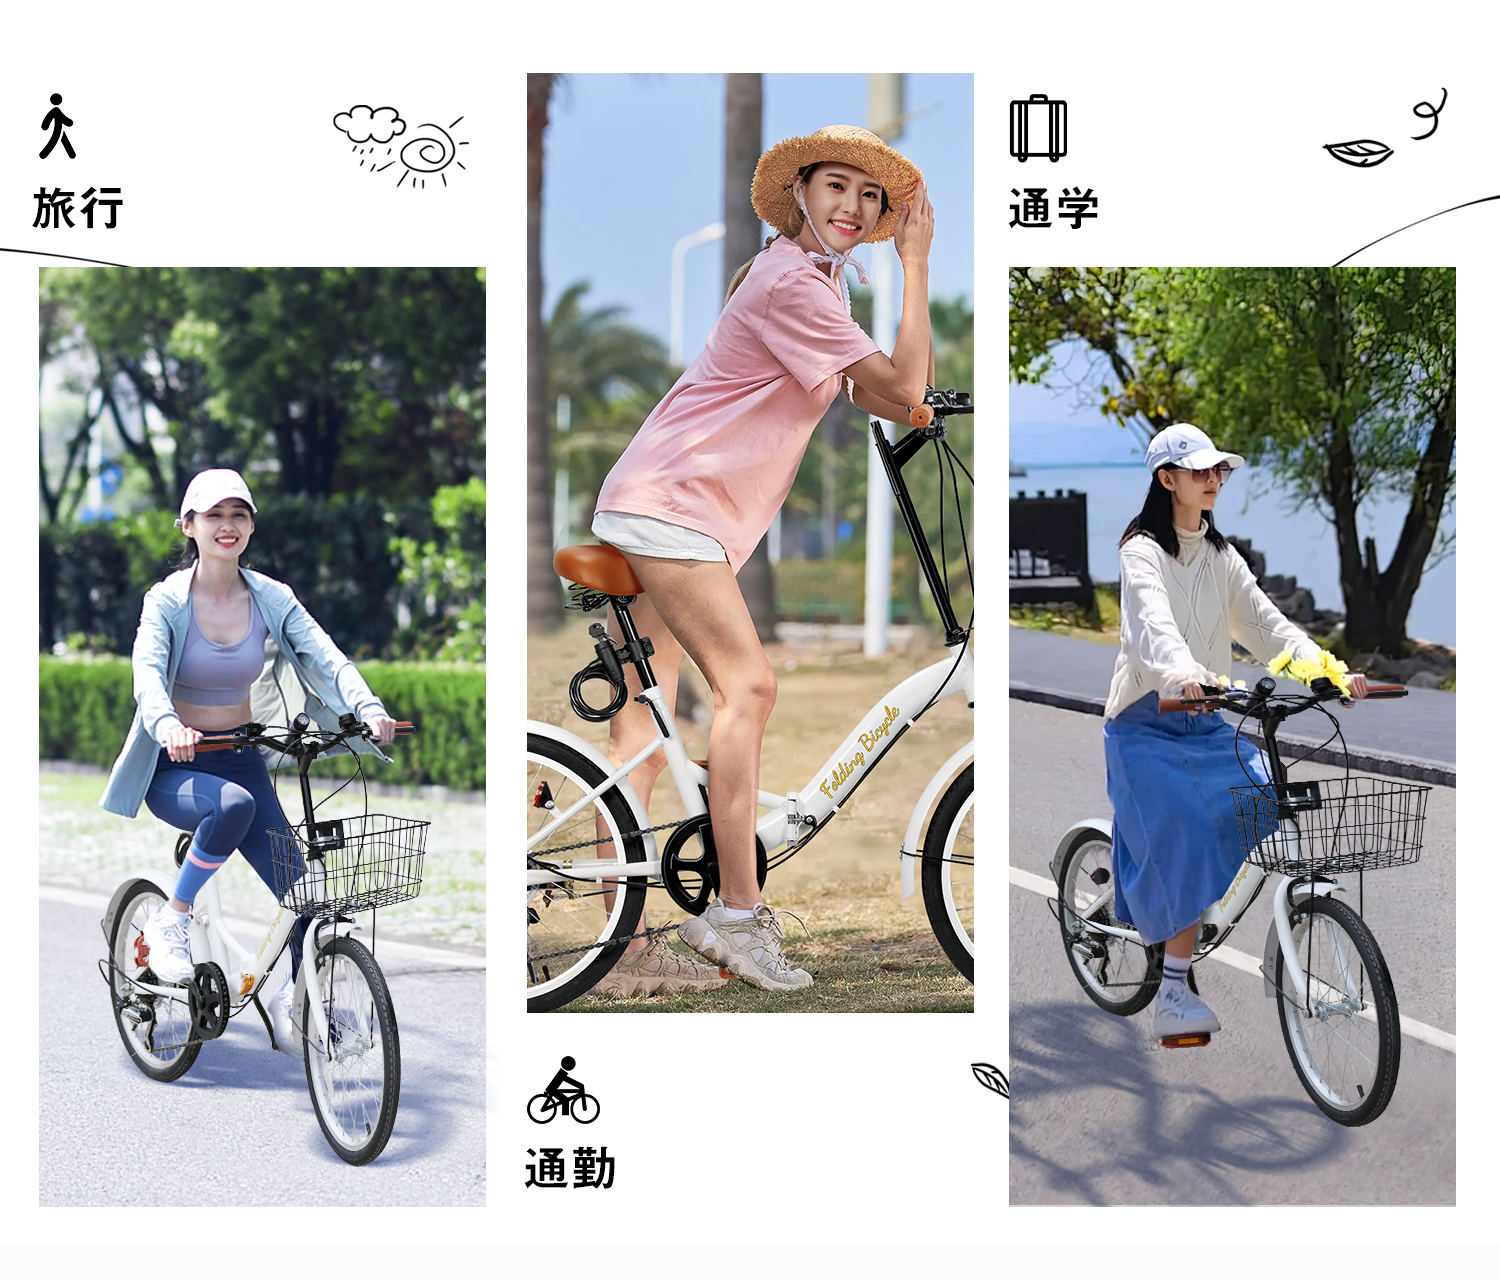  foldable bicycle 20 -inch Shimano 6 step shifting gears gear light weight stylish front light * basket * wire lock * air pump attaching gift commuting going to school new life X-TRAK